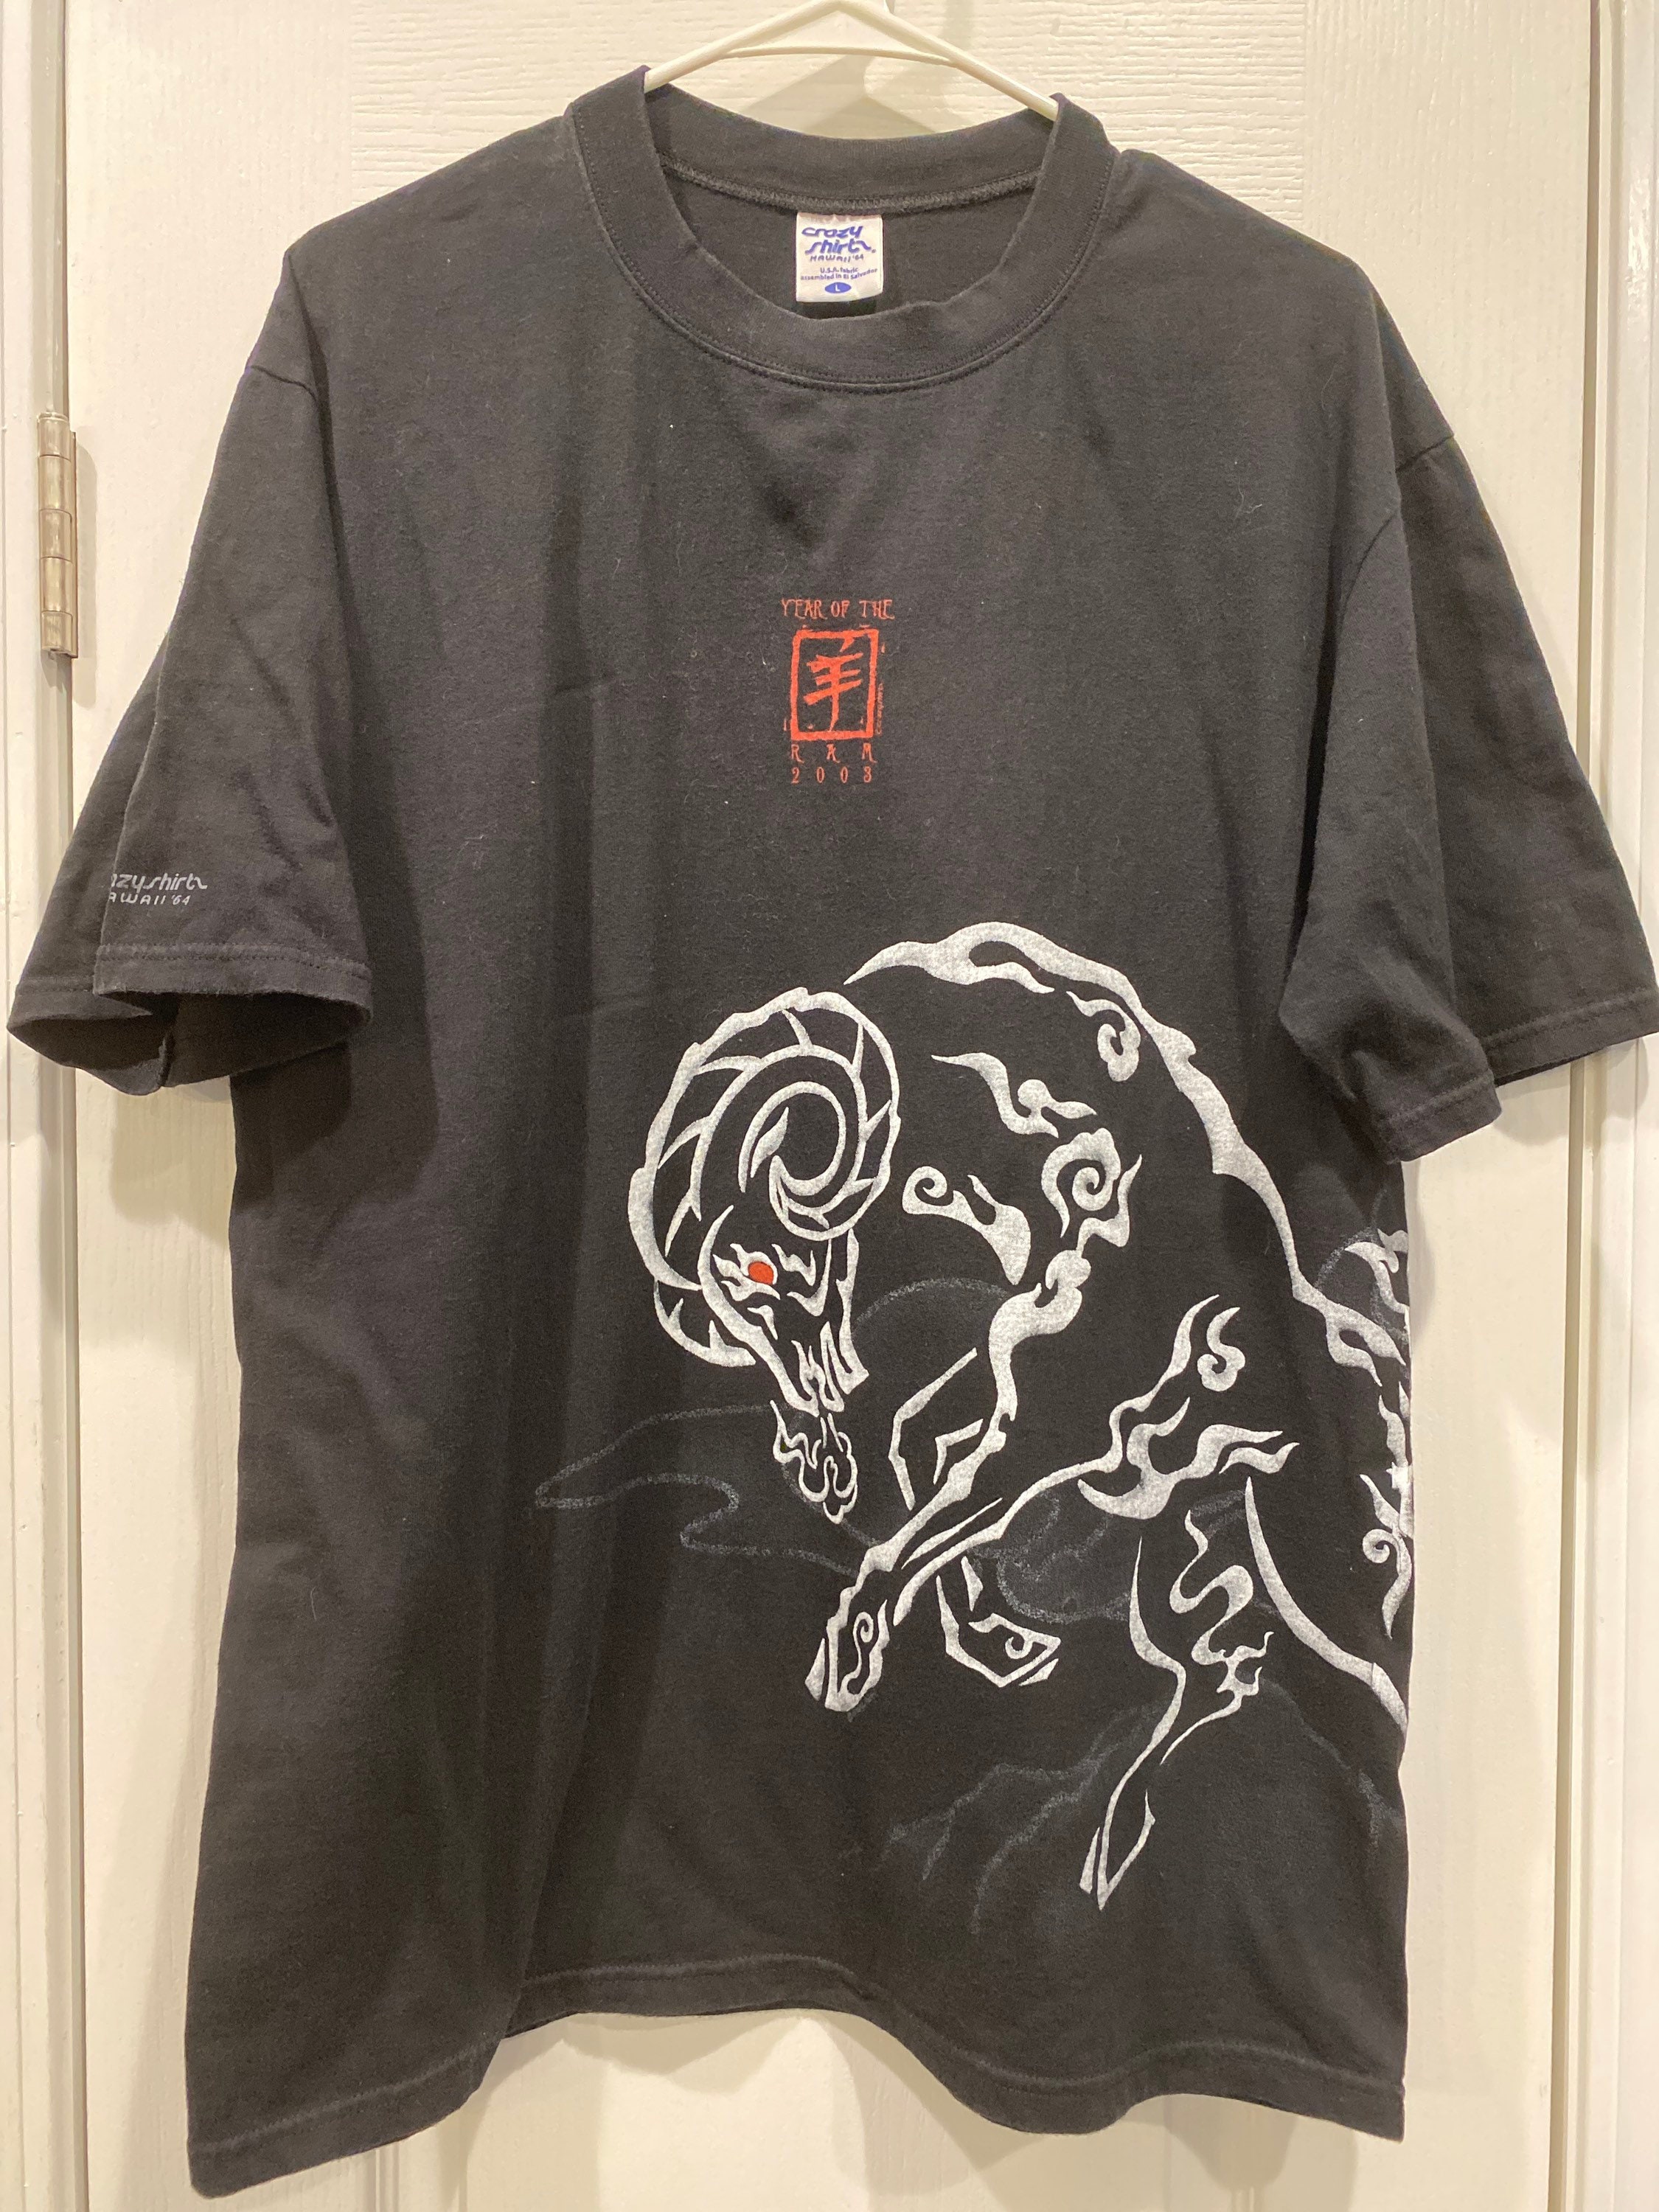 Rare Crazy Shirts 2003 Year Of The Ram T-Shirt Black Size Large. Free Shipping Usa Only